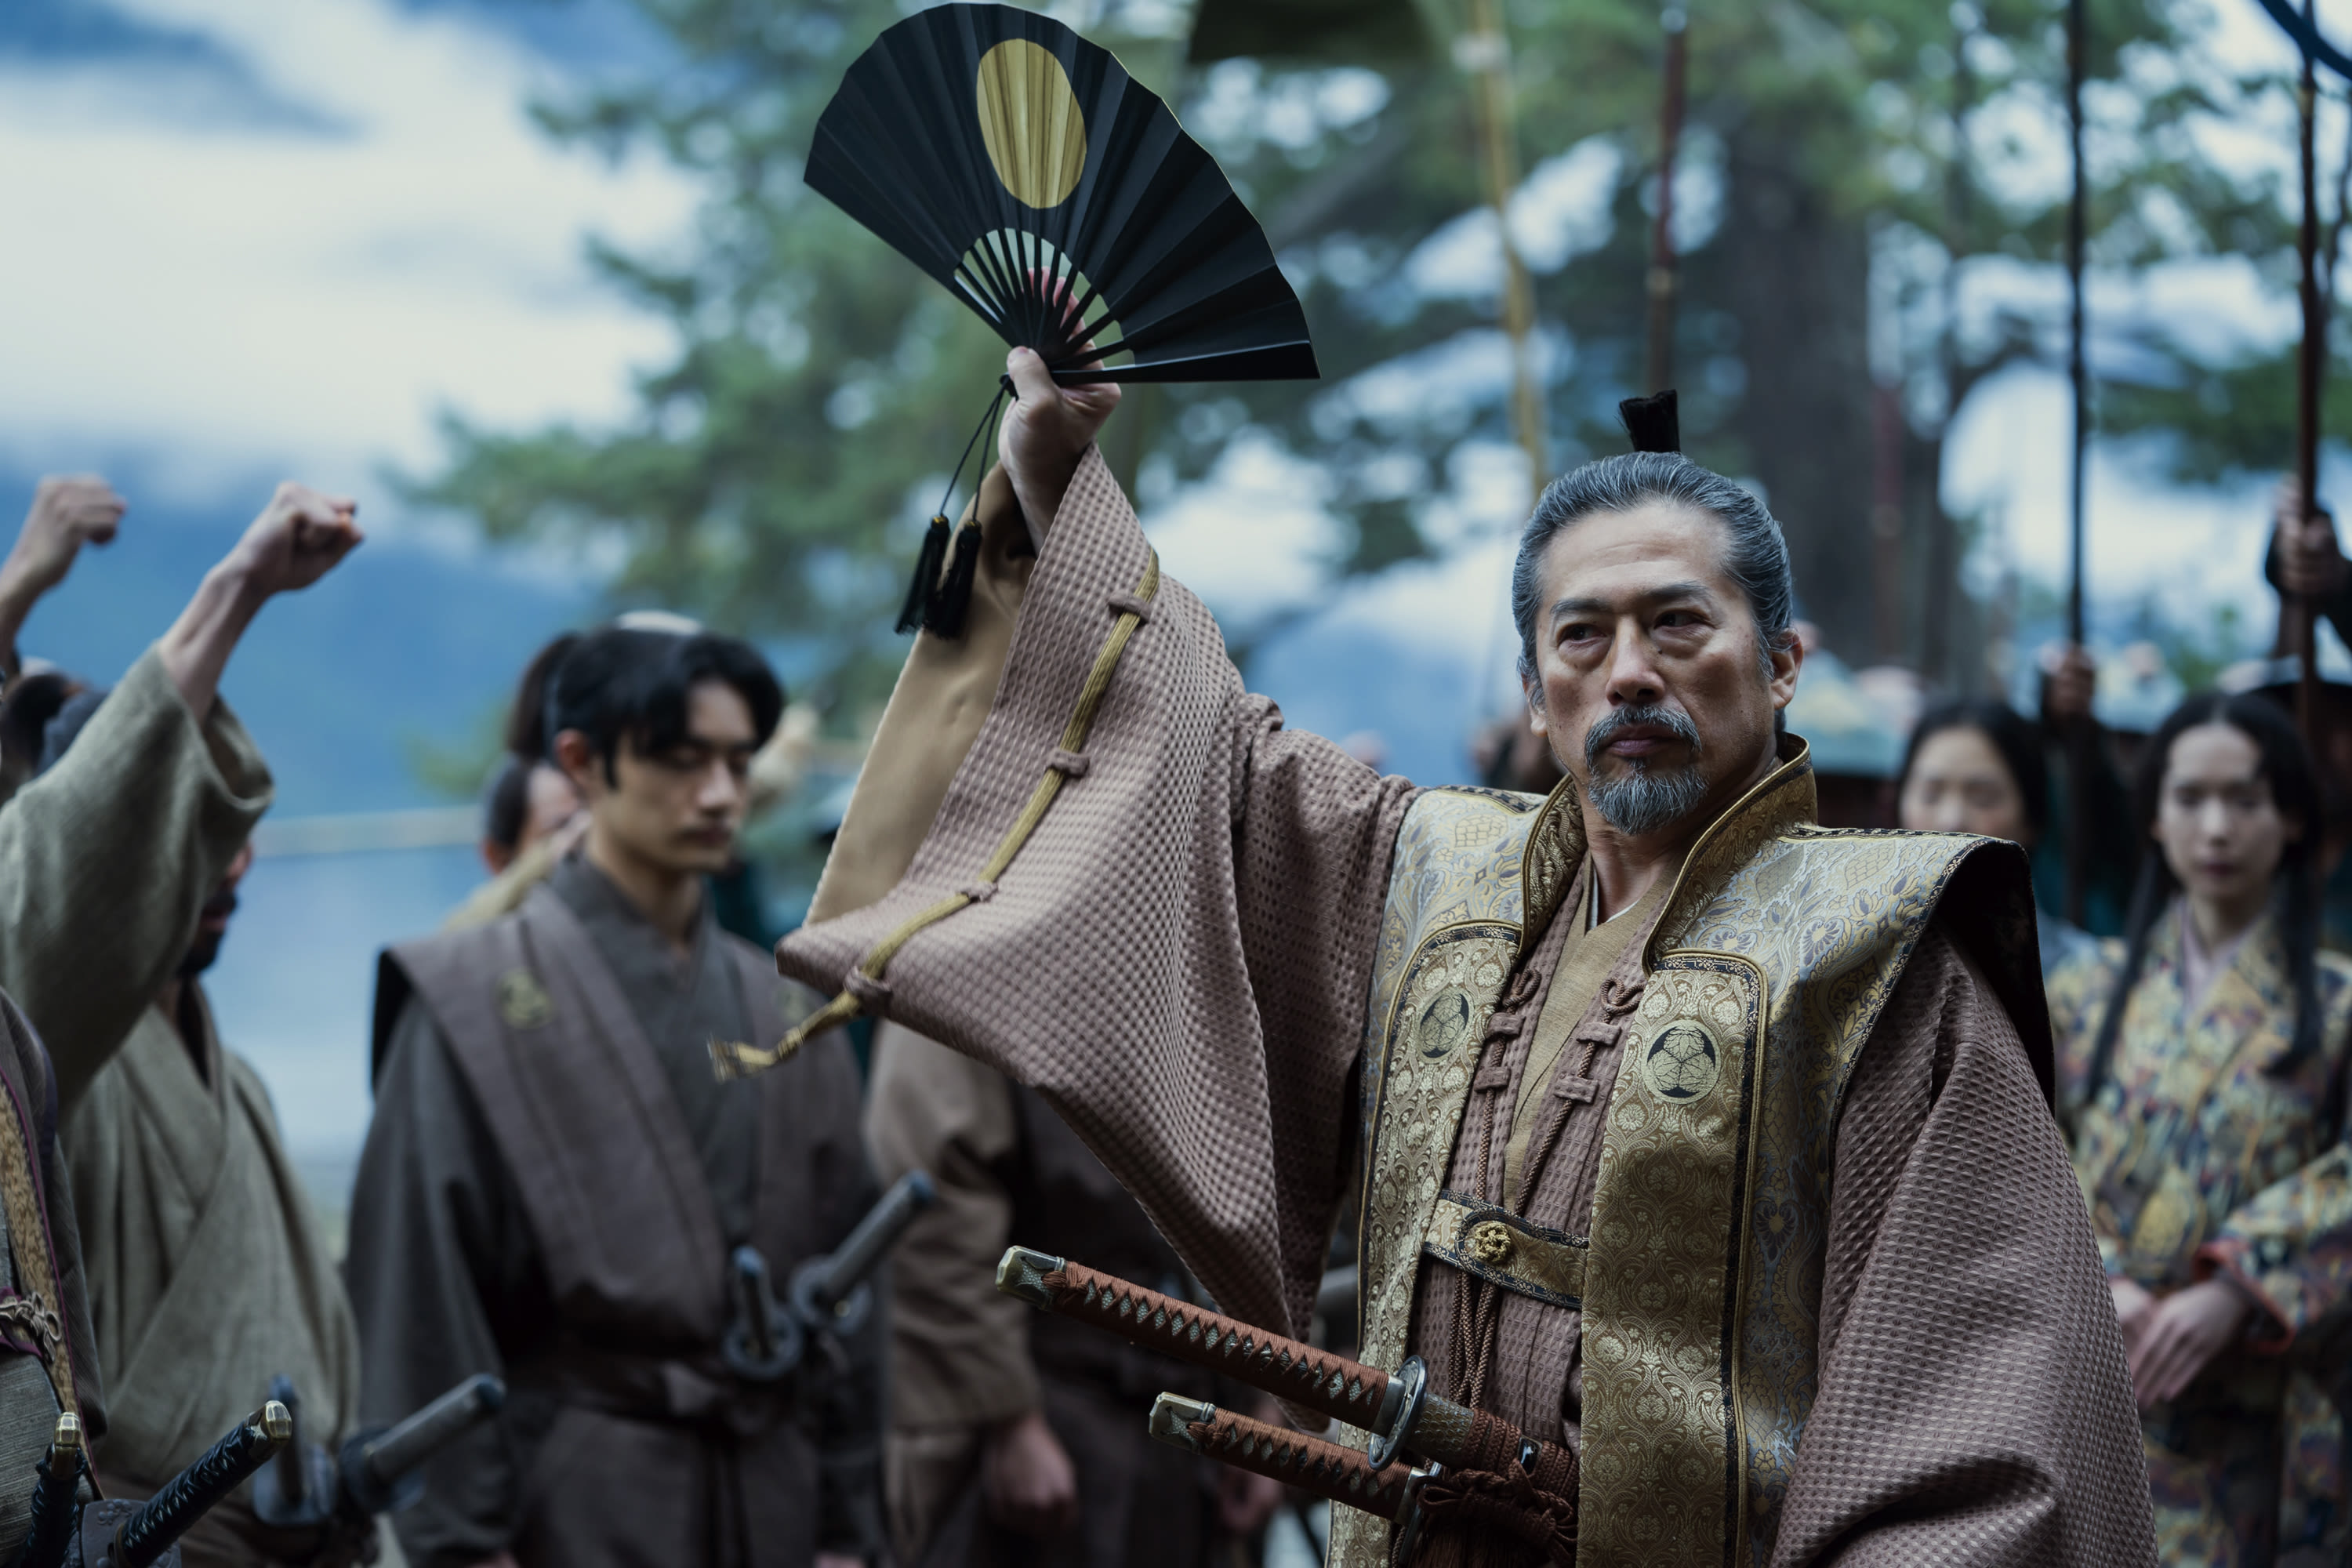 ‘Shogun’ Star Hiroyuki Sanada Delves Into Finale’s Deeper Message: “We Need the Hero Who Brings About Peace”